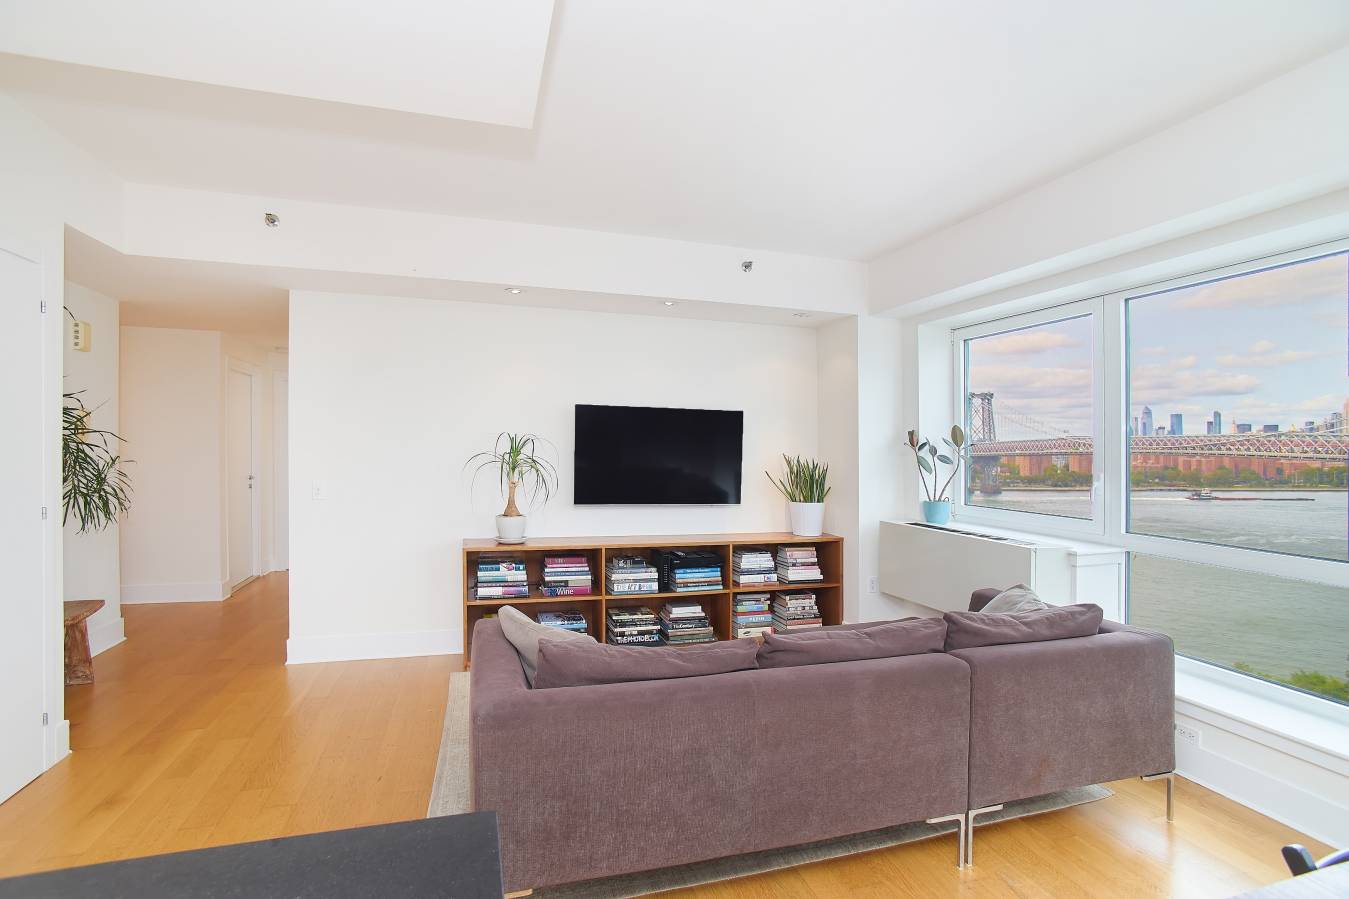 Come see this exquisite residence located at Schaefer Landing North, a luxury condominium on the East River waterfront in New York City's trendiest neighborhood, Williamsburg Brooklyn.